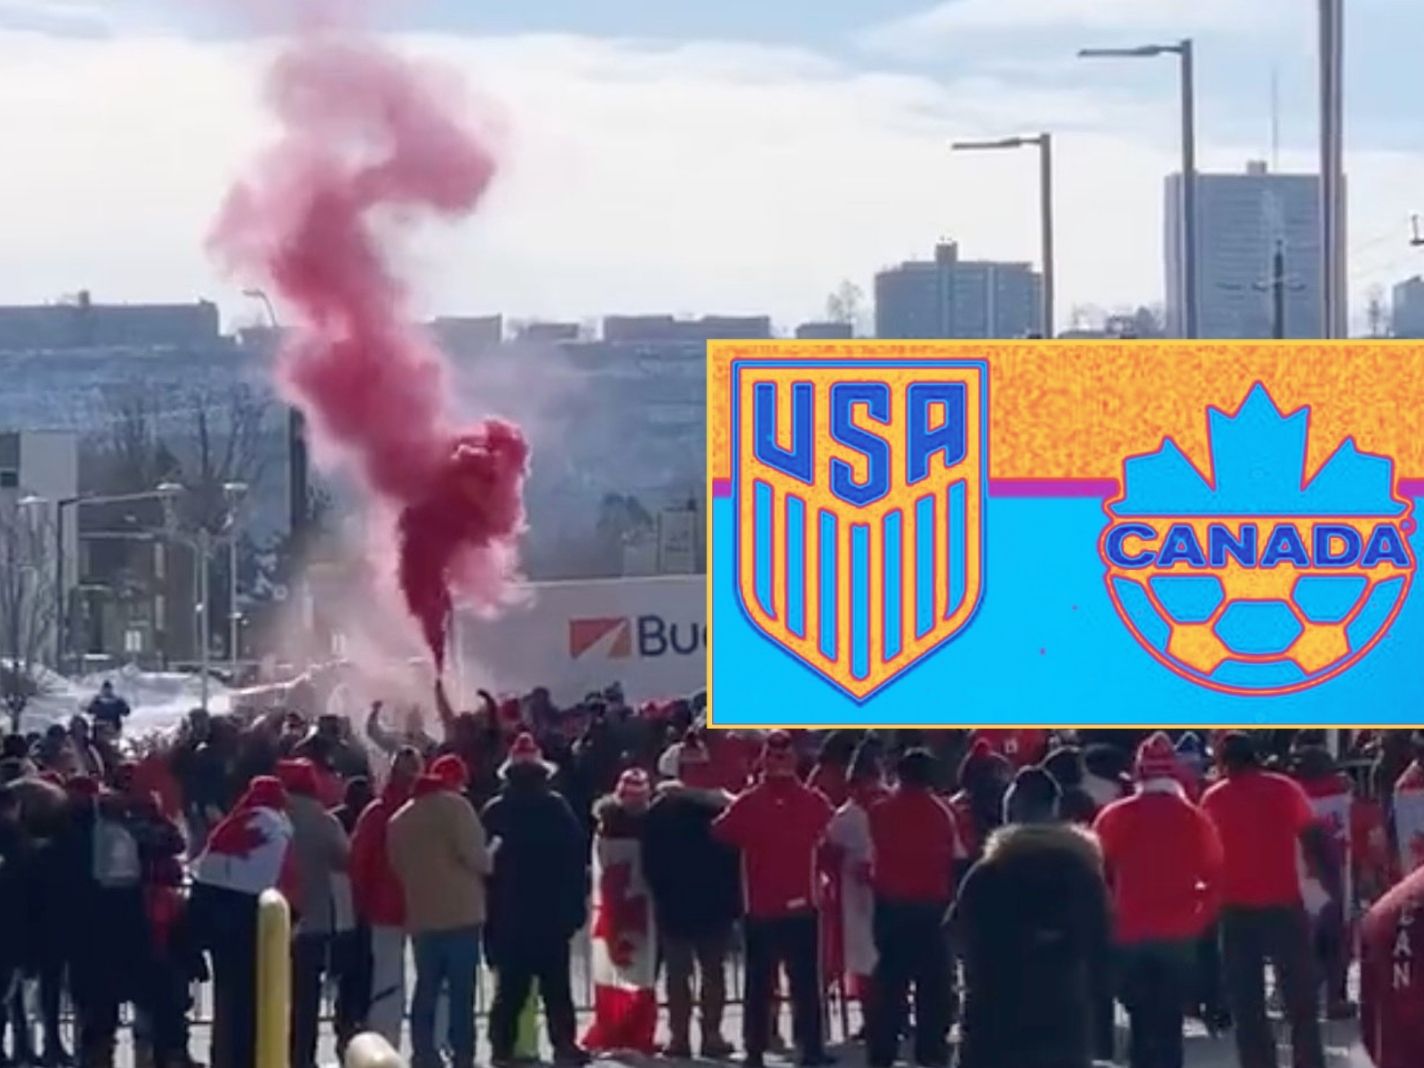 USMNT fans respond hilariously to White House chants by Canadians